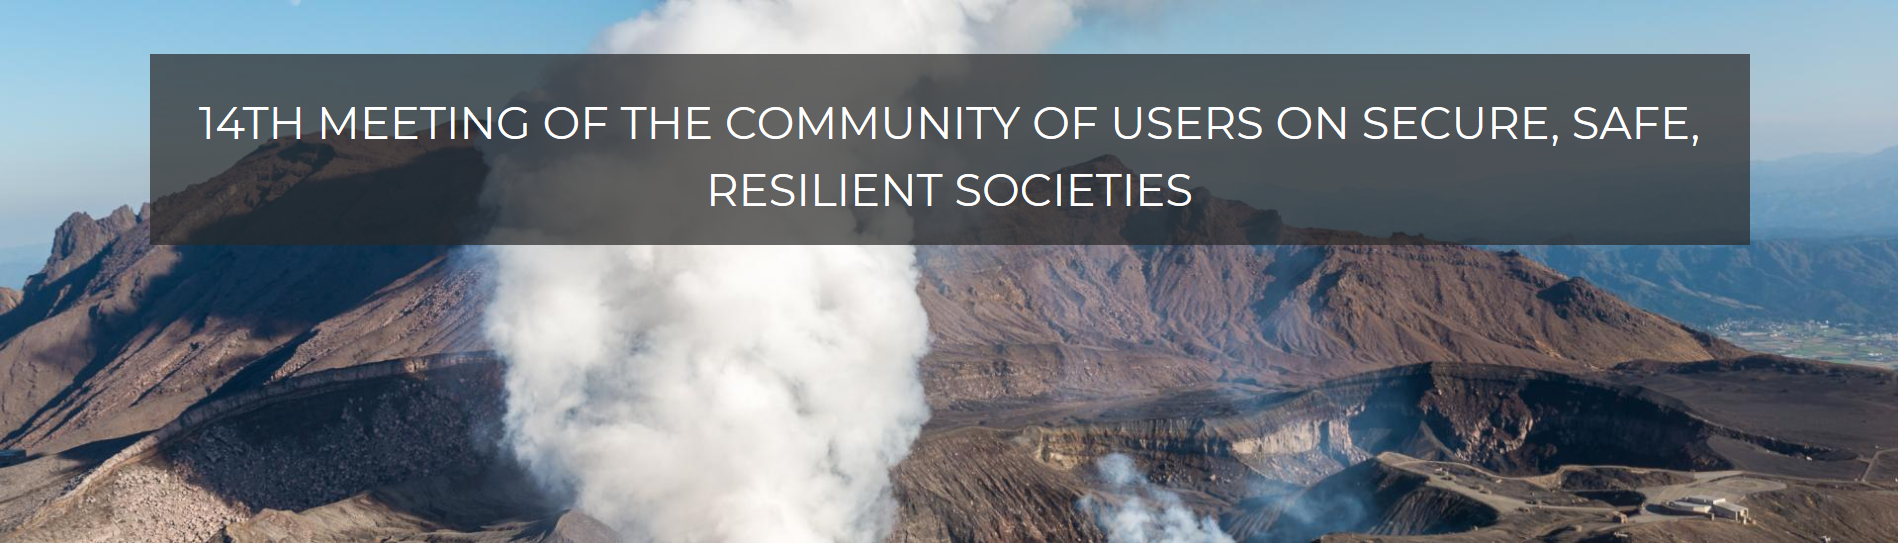 14th Meeting of the Community of Users on Secure, Safe, Resilient Societies